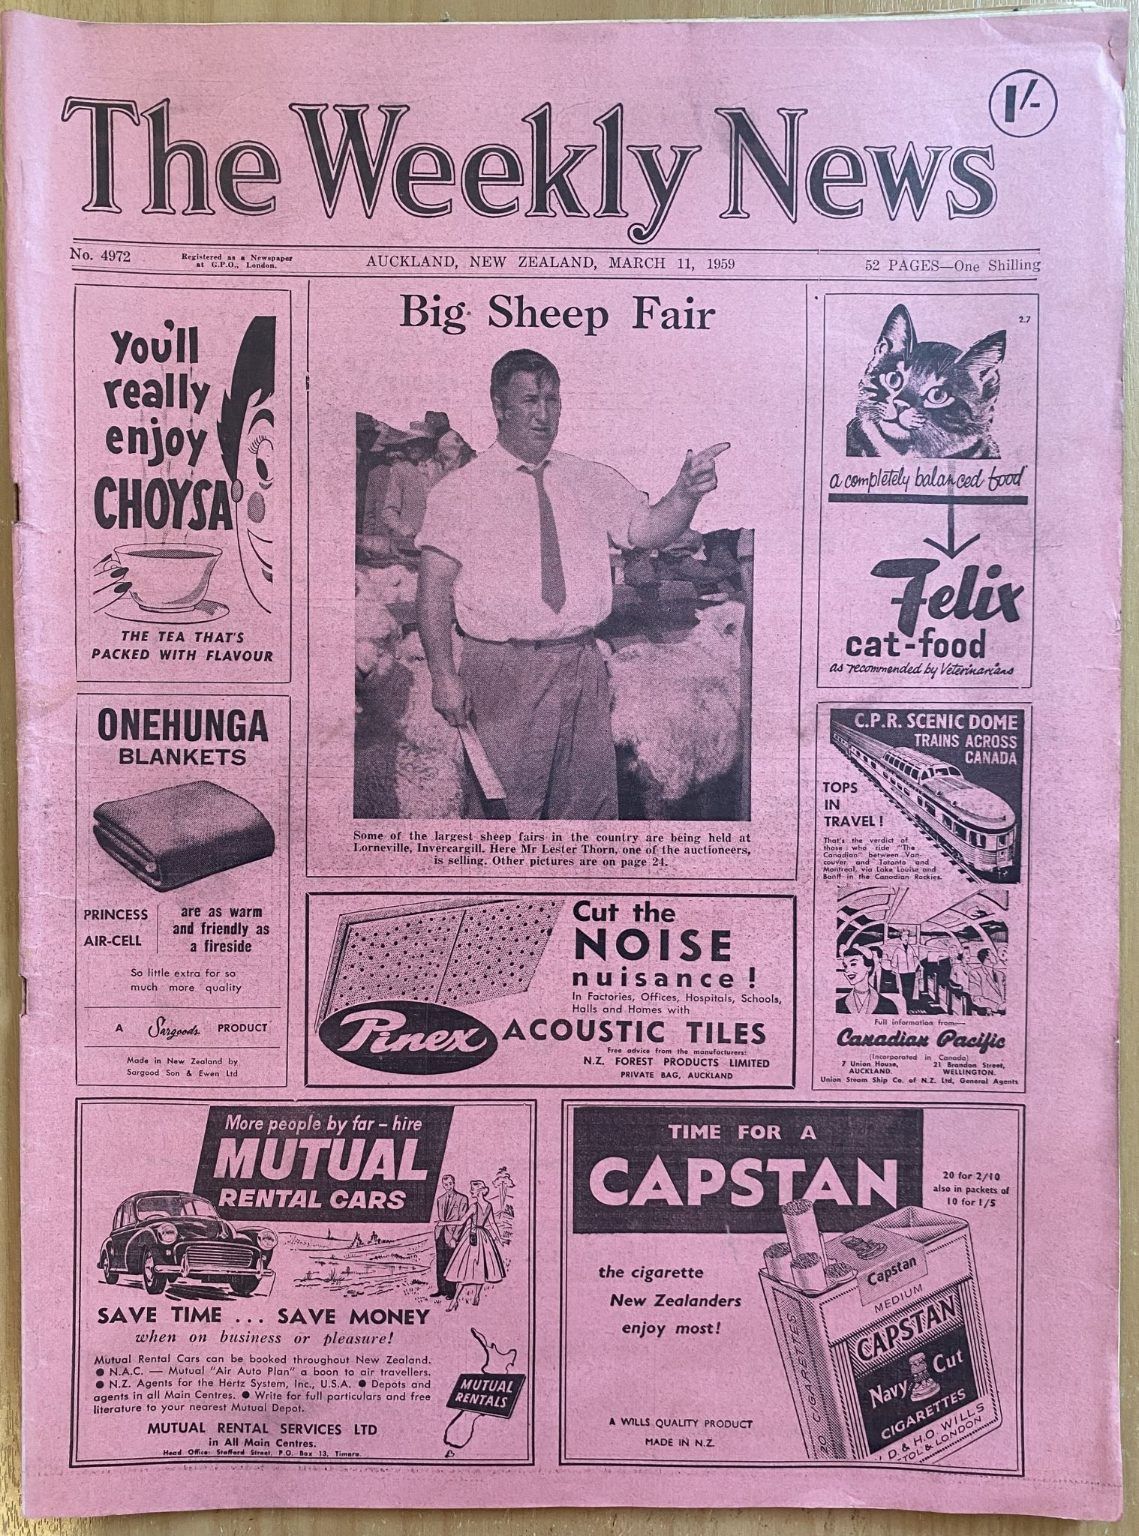 OLD NEWSPAPER: The Weekly News - No. 4972, 11 March 1959